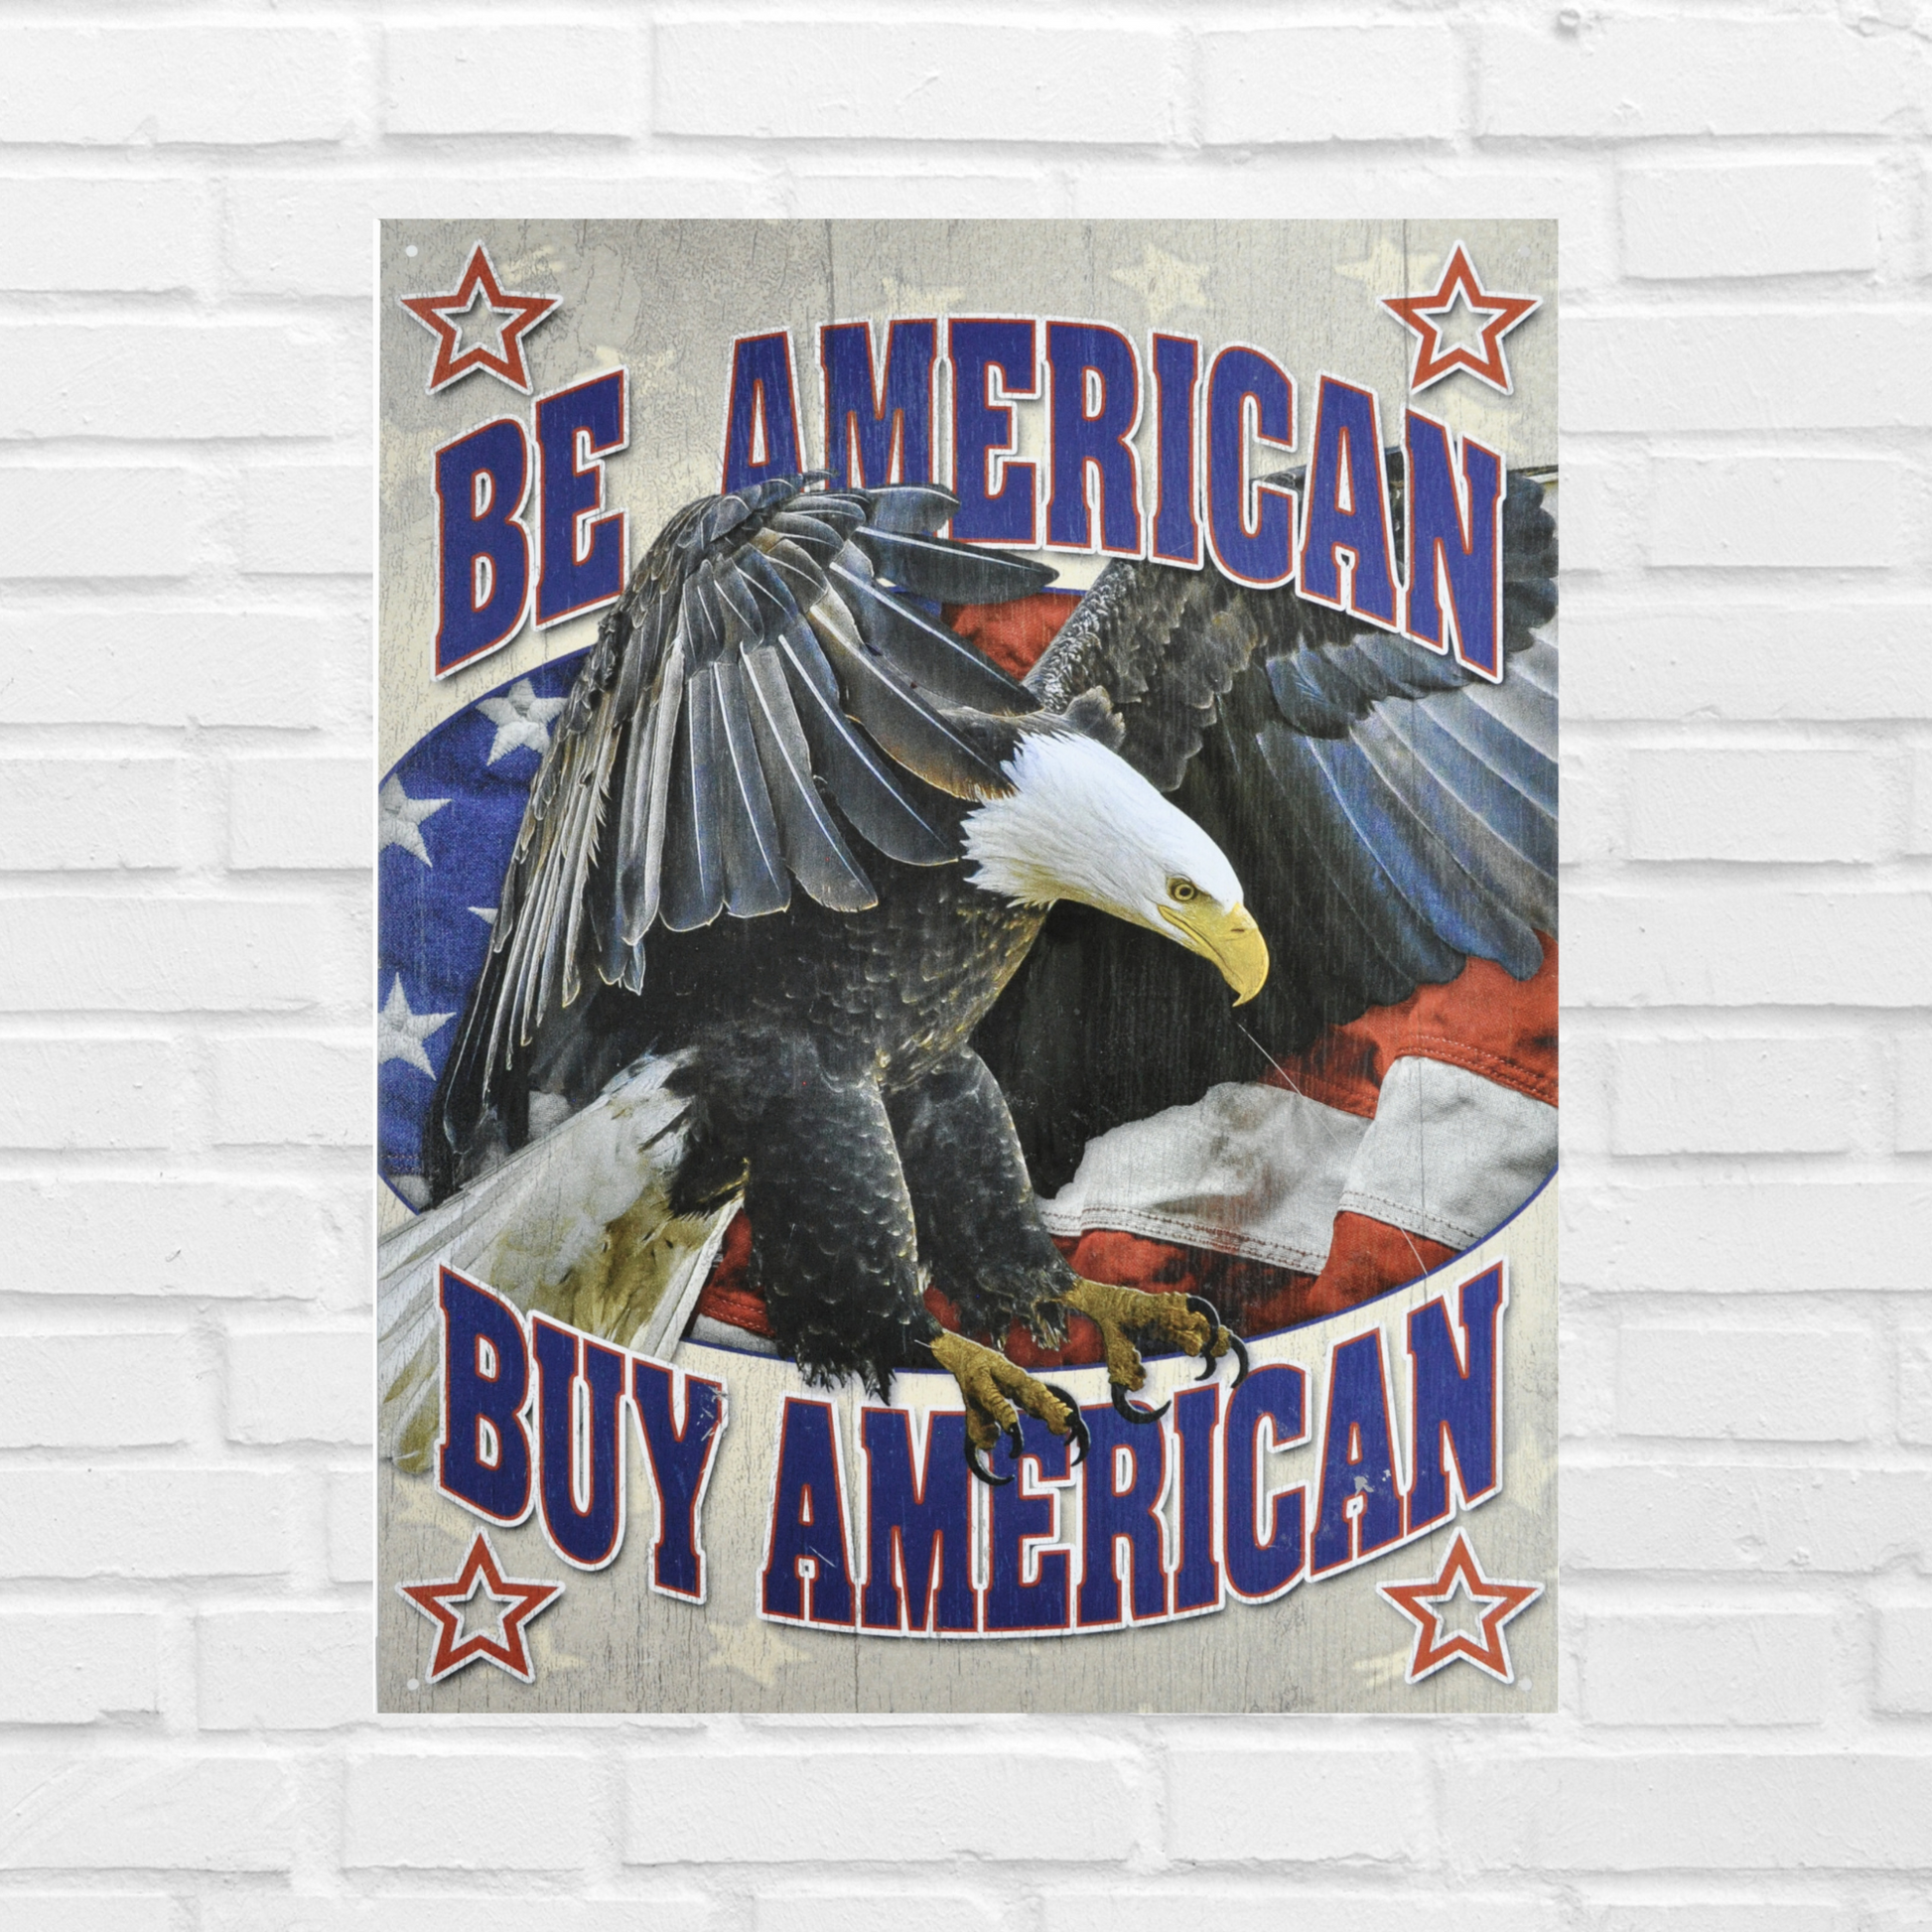 Vintage Poster Print that says " Be American, Buy American" with a bald eagle flying in the middle. With Red white and blue American flag in the background.